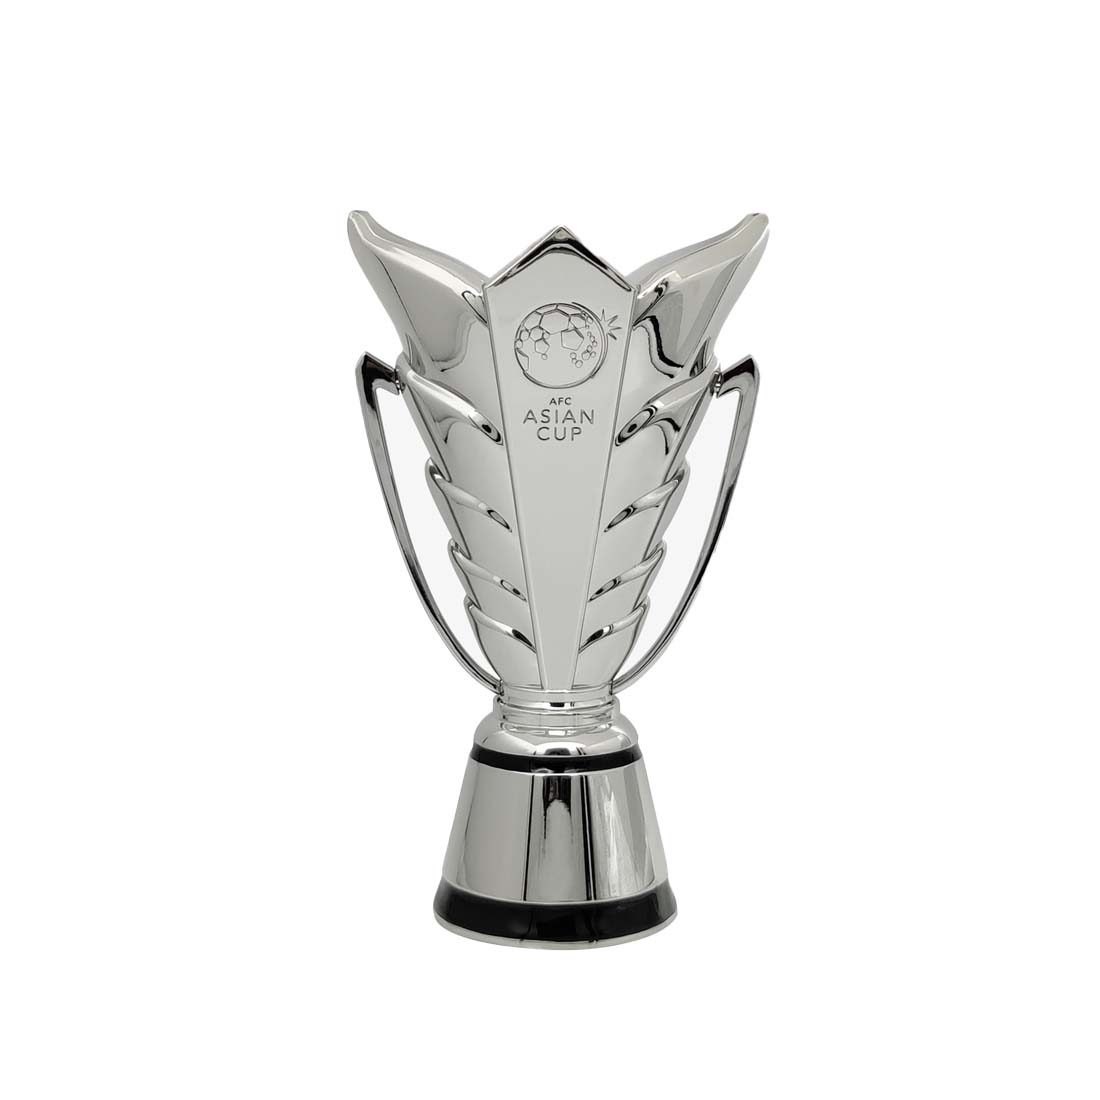 100mm Trophy Replica with Pedestal - أكسسوار - Store 974 | ستور ٩٧٤